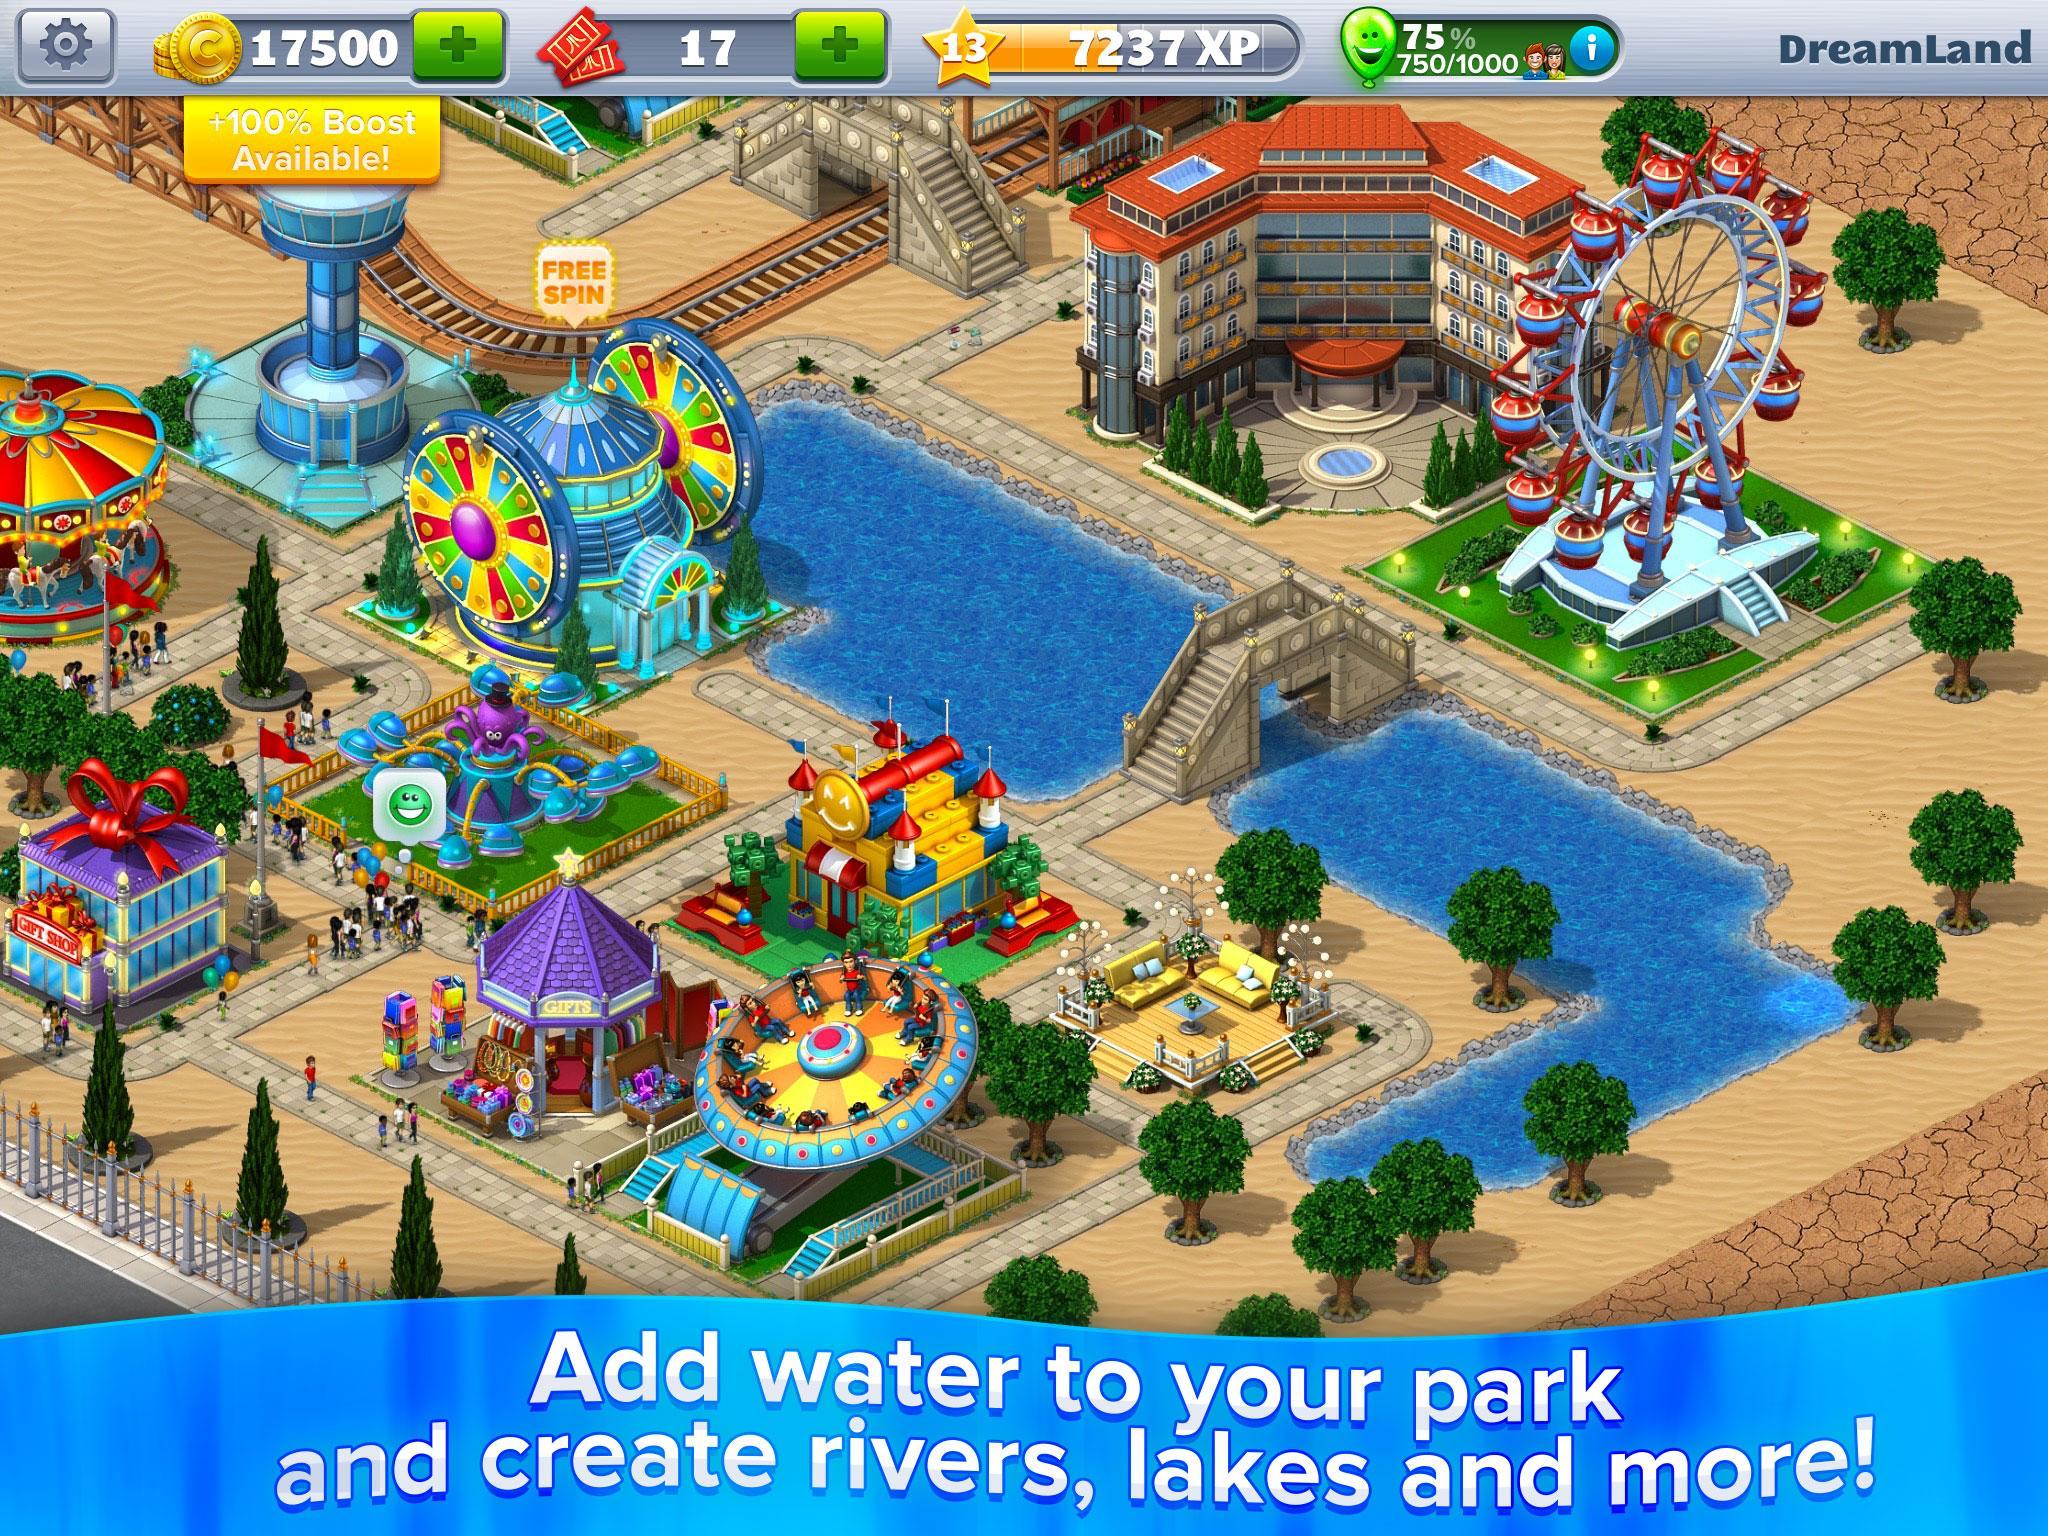 RollerCoaster Tycoon® 4 Mobile for Android - APK Download